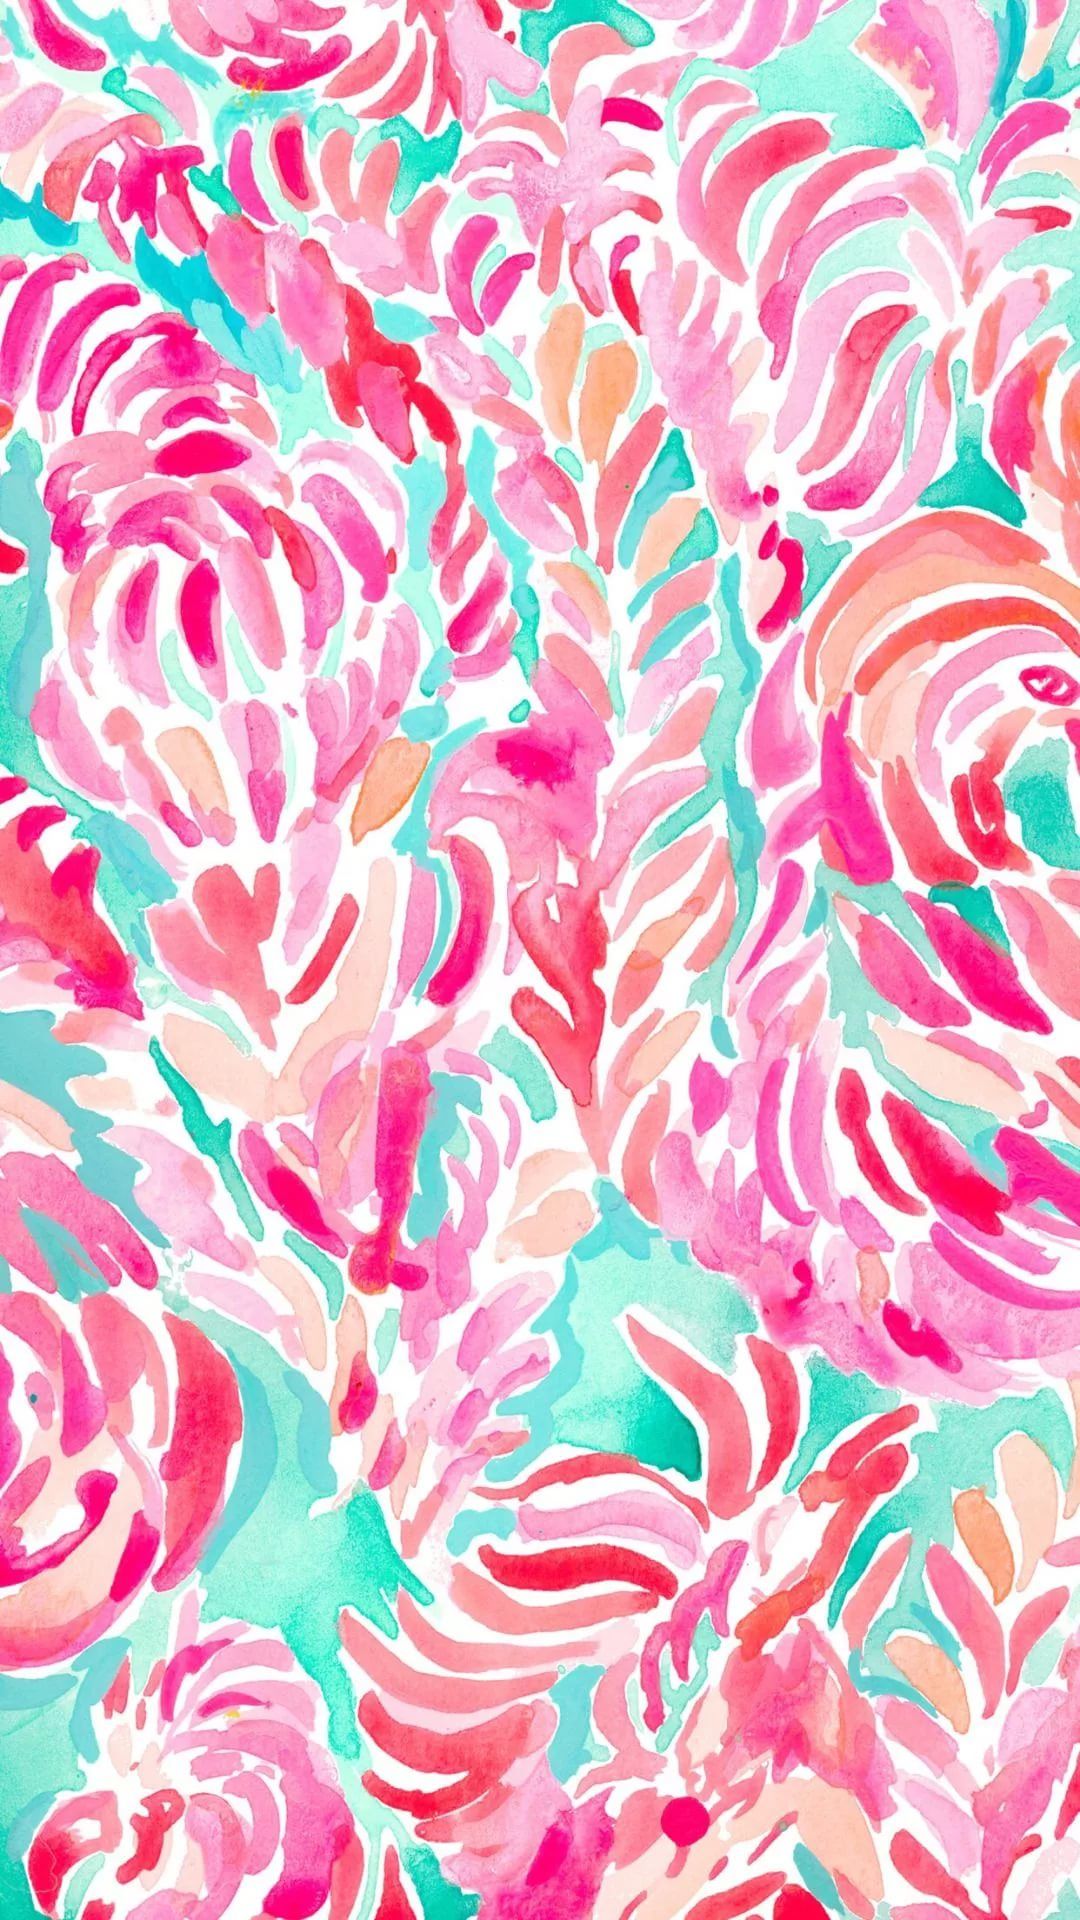 Lilly Pulitzer Iphone Hd Wallpaper - Cute Backgrounds Tropical Watercolor - HD Wallpaper 